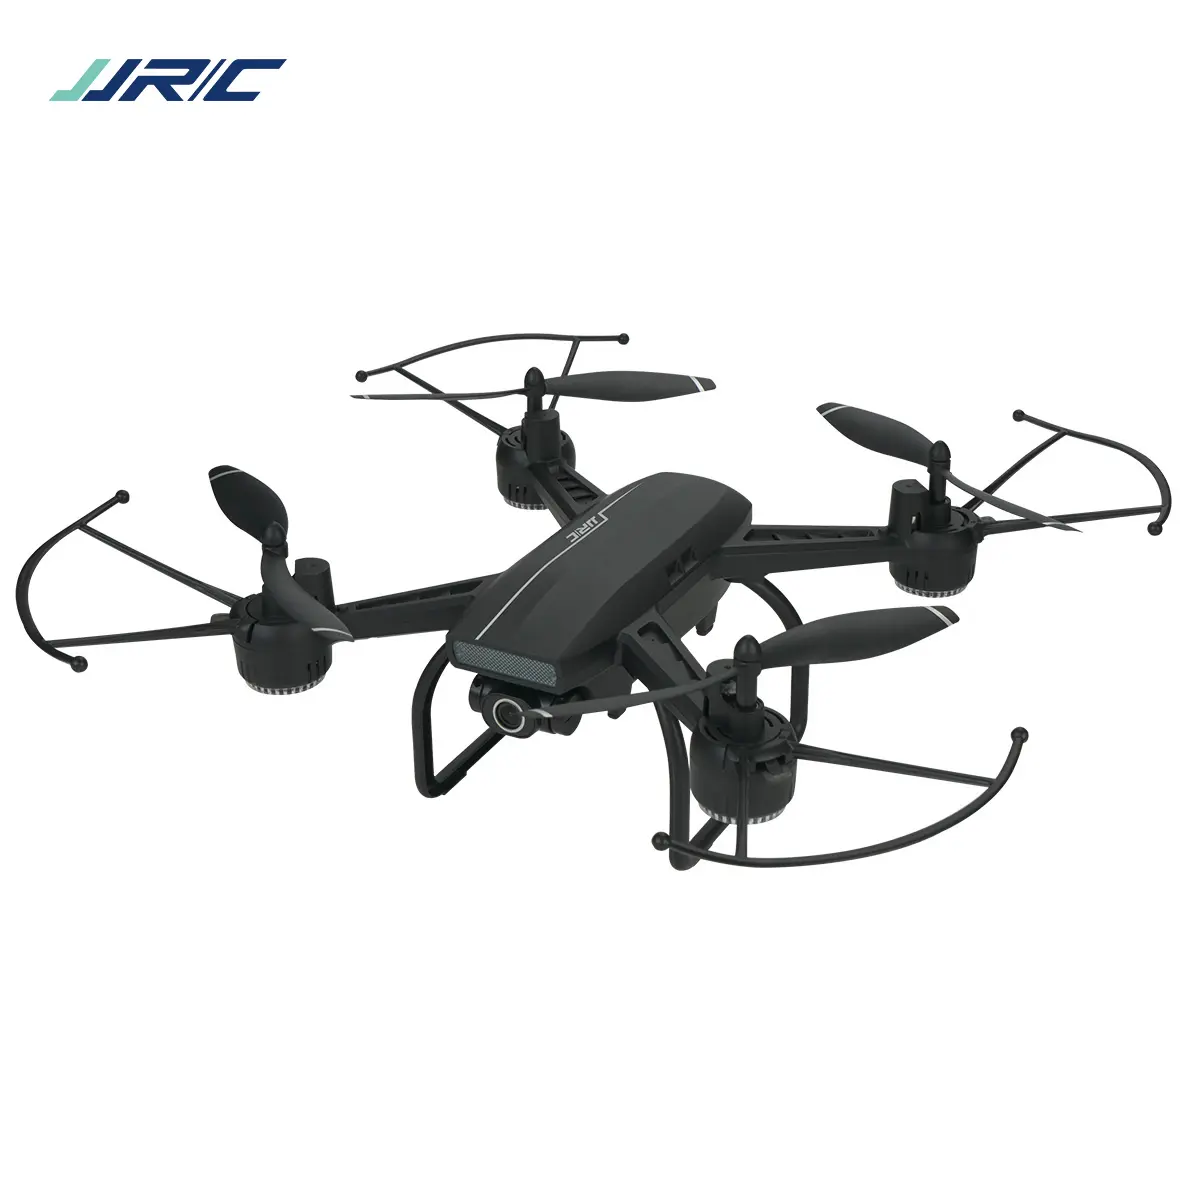 Jjrc H86 Rc Drone 2.4g With Wifi Fpv 4k Hd Camera Aerial Photography Altitude Hold Remote Control Racing small drone with camera